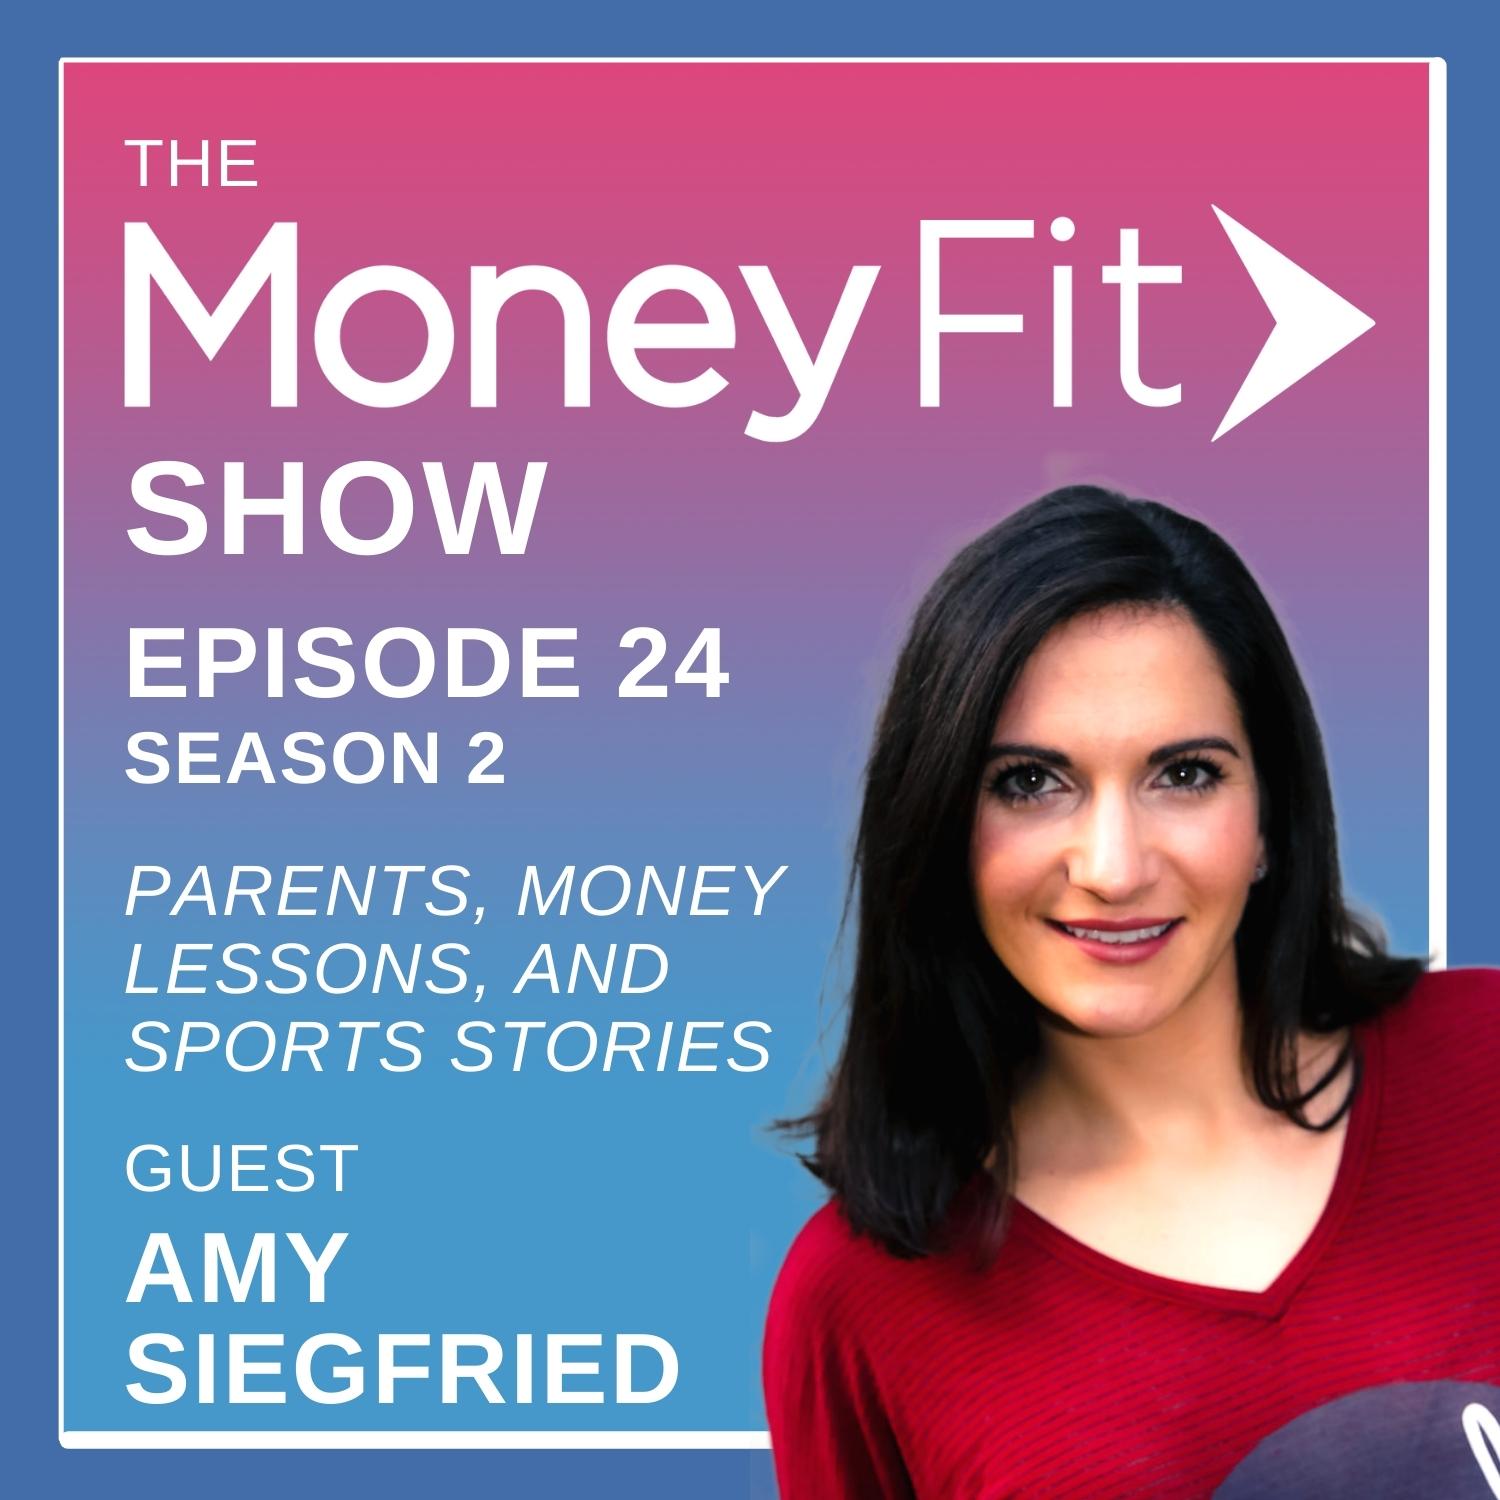 Parents, Financial Lessons, and Sports Stories, with Amy Siegfried of Last Night’s Game